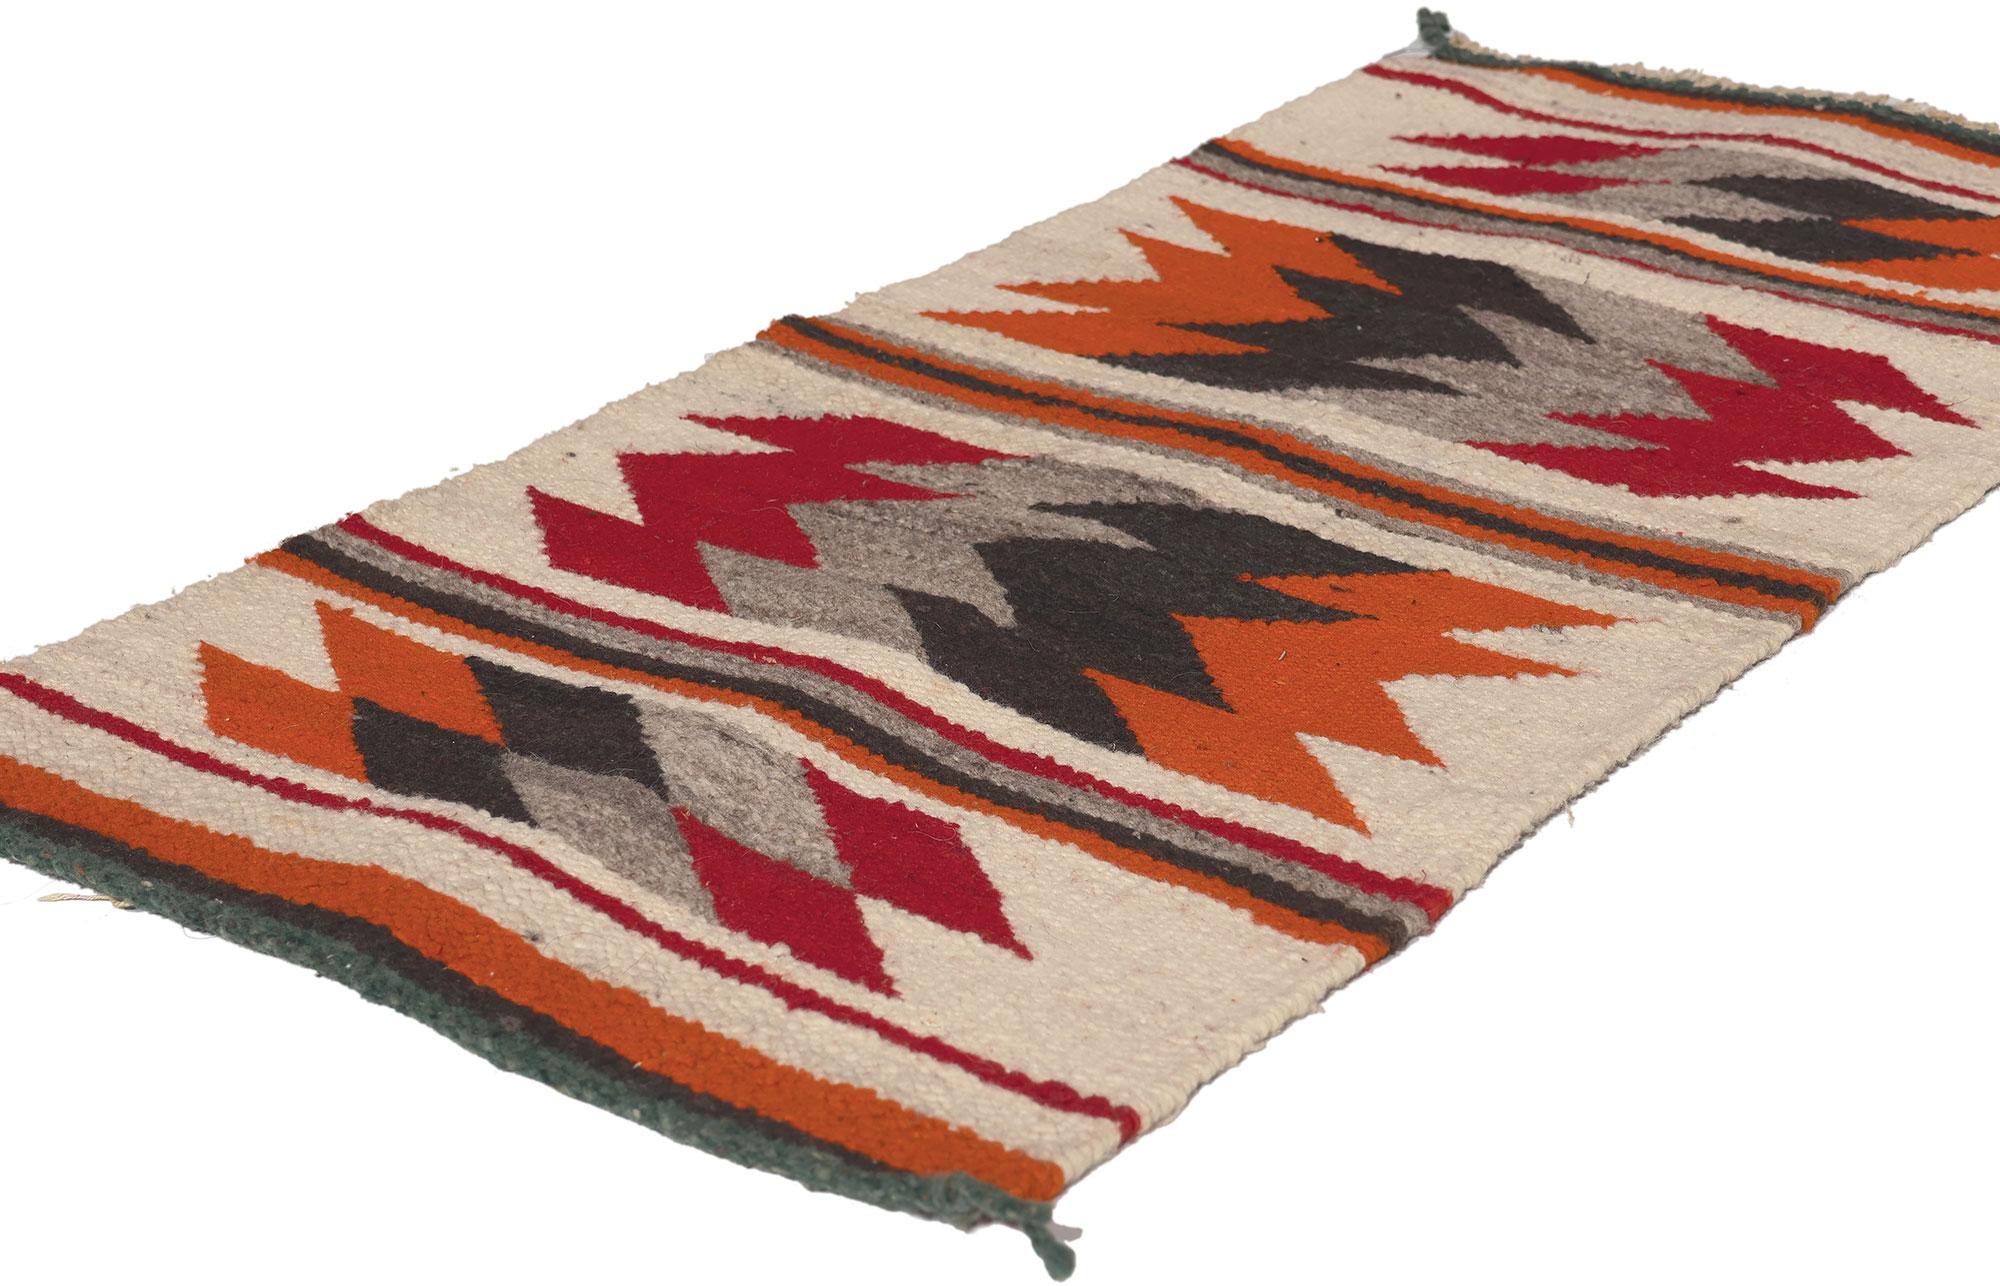 78627 Antique Eye Dazzler Navajo Sampler Rug, 01'06 x 03'02.
Modern Southwest style meets luxury lodge in this handwoven Native American Navajo rug. The striking Eye Dazzler design and earthy colorway woven into this piece work together creating an